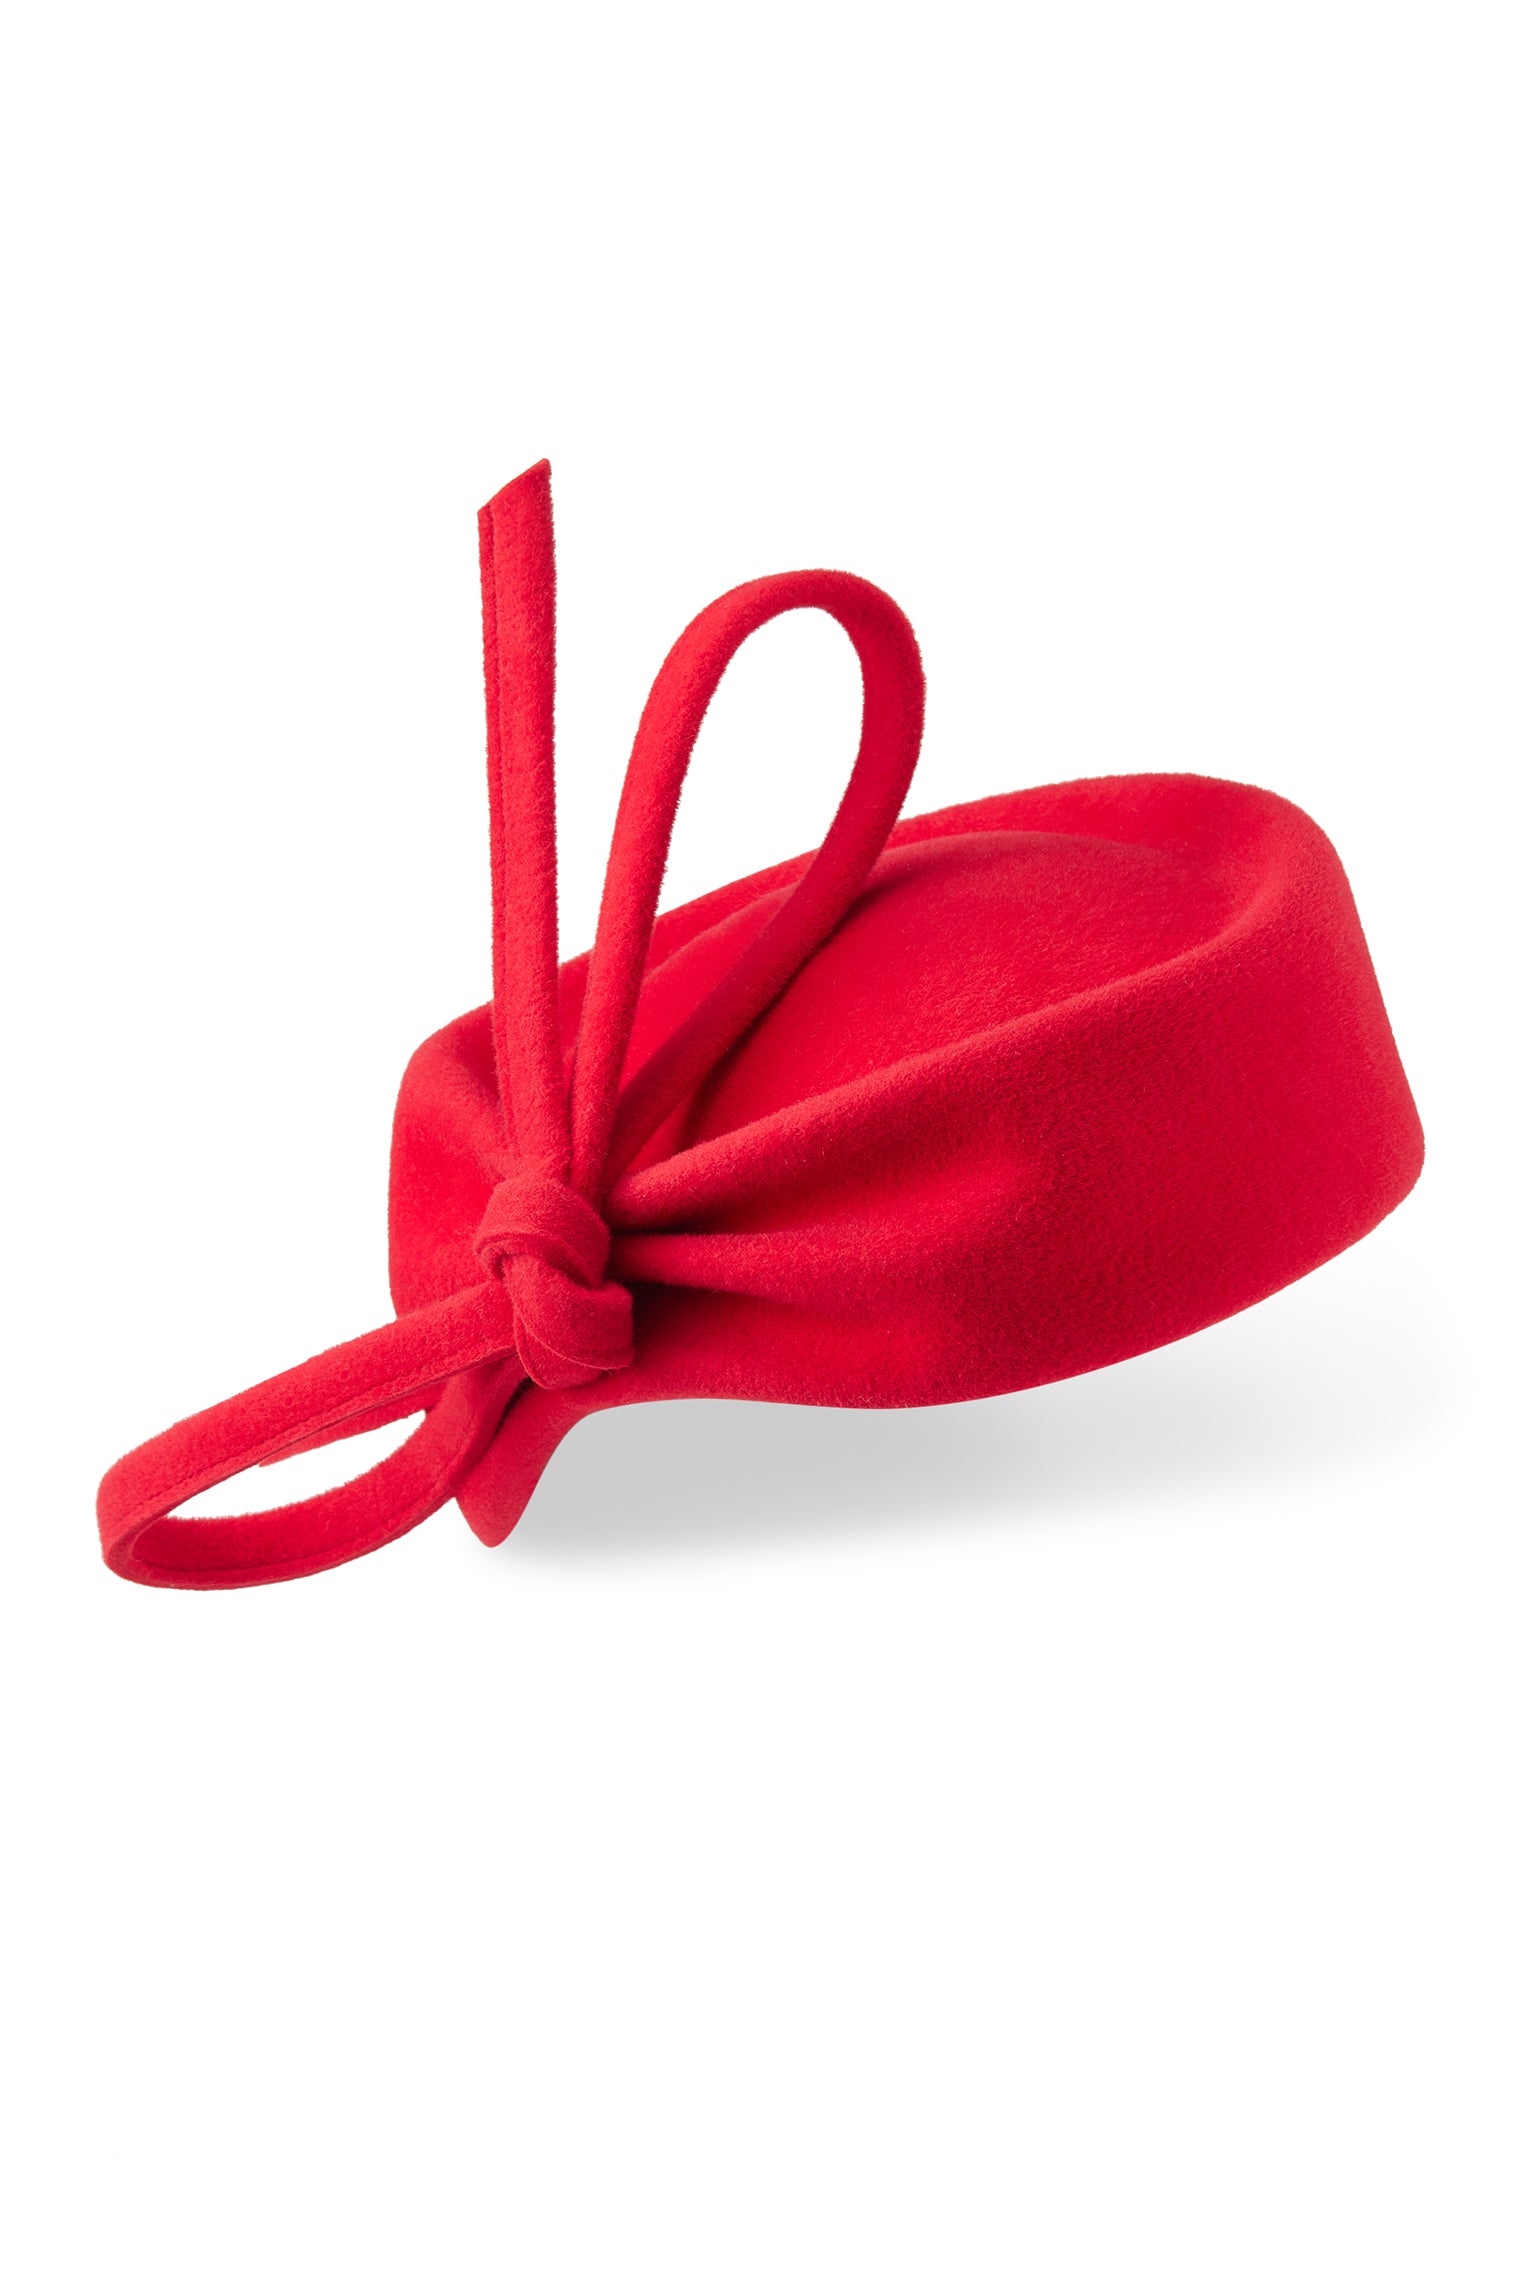 Mayfair Red Pillbox Hat - Products - Lock & Co. Hatters London UK